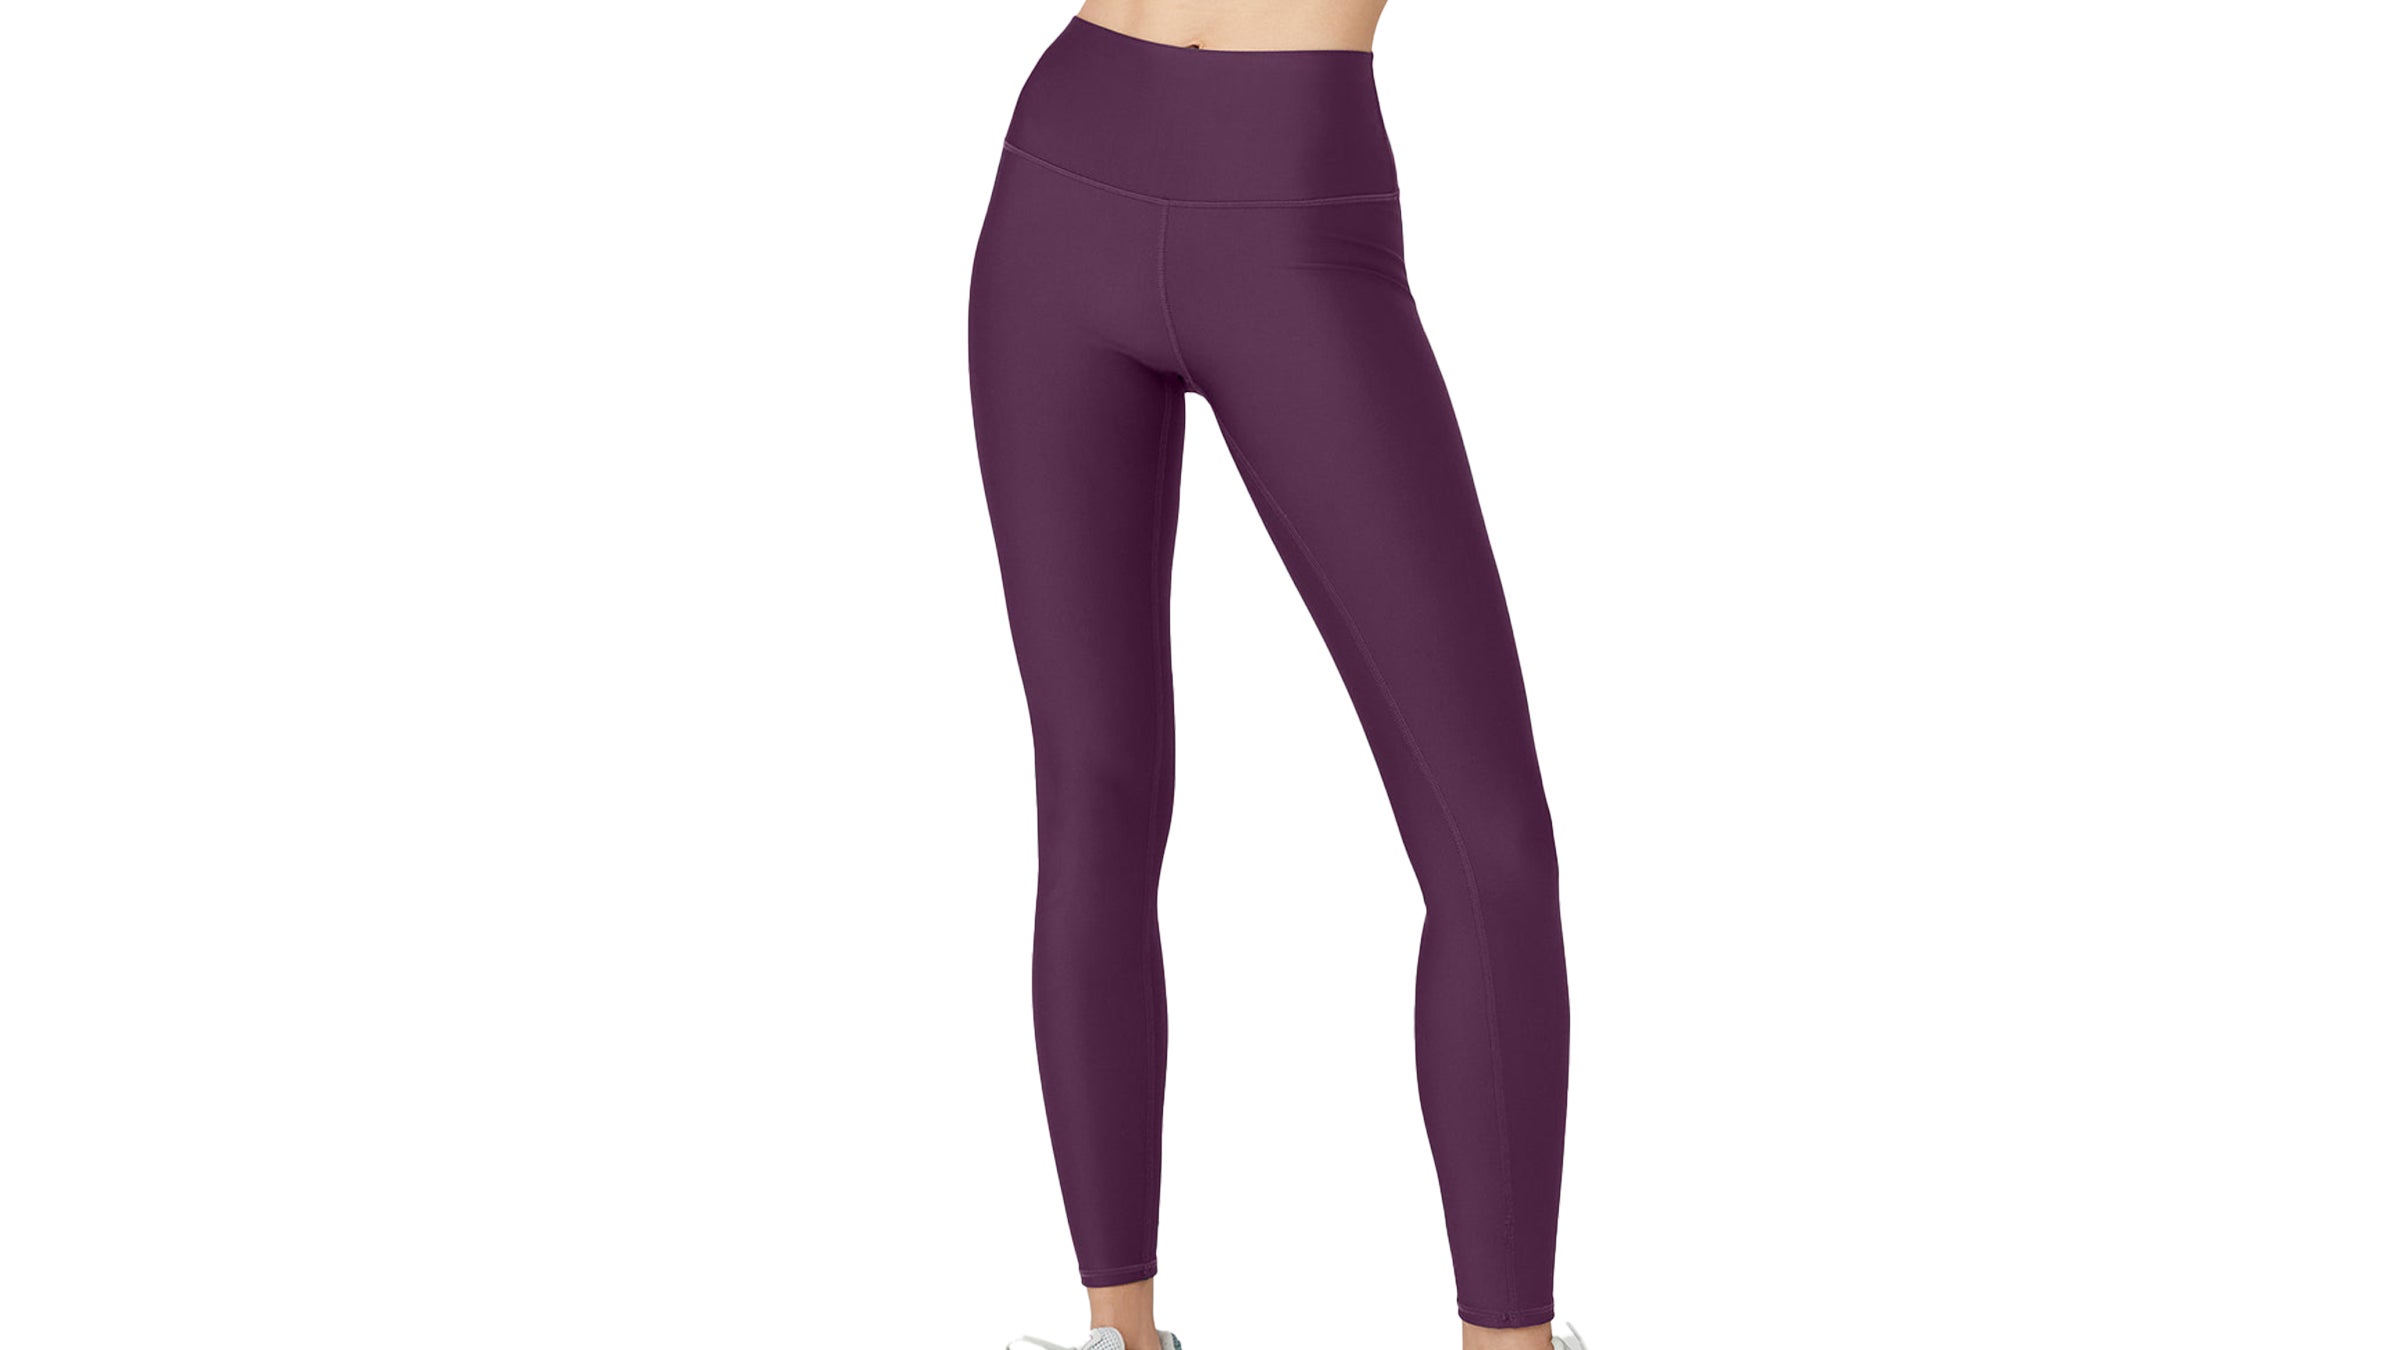 The 'Perfect' Yoga Pants Are 54% Off at